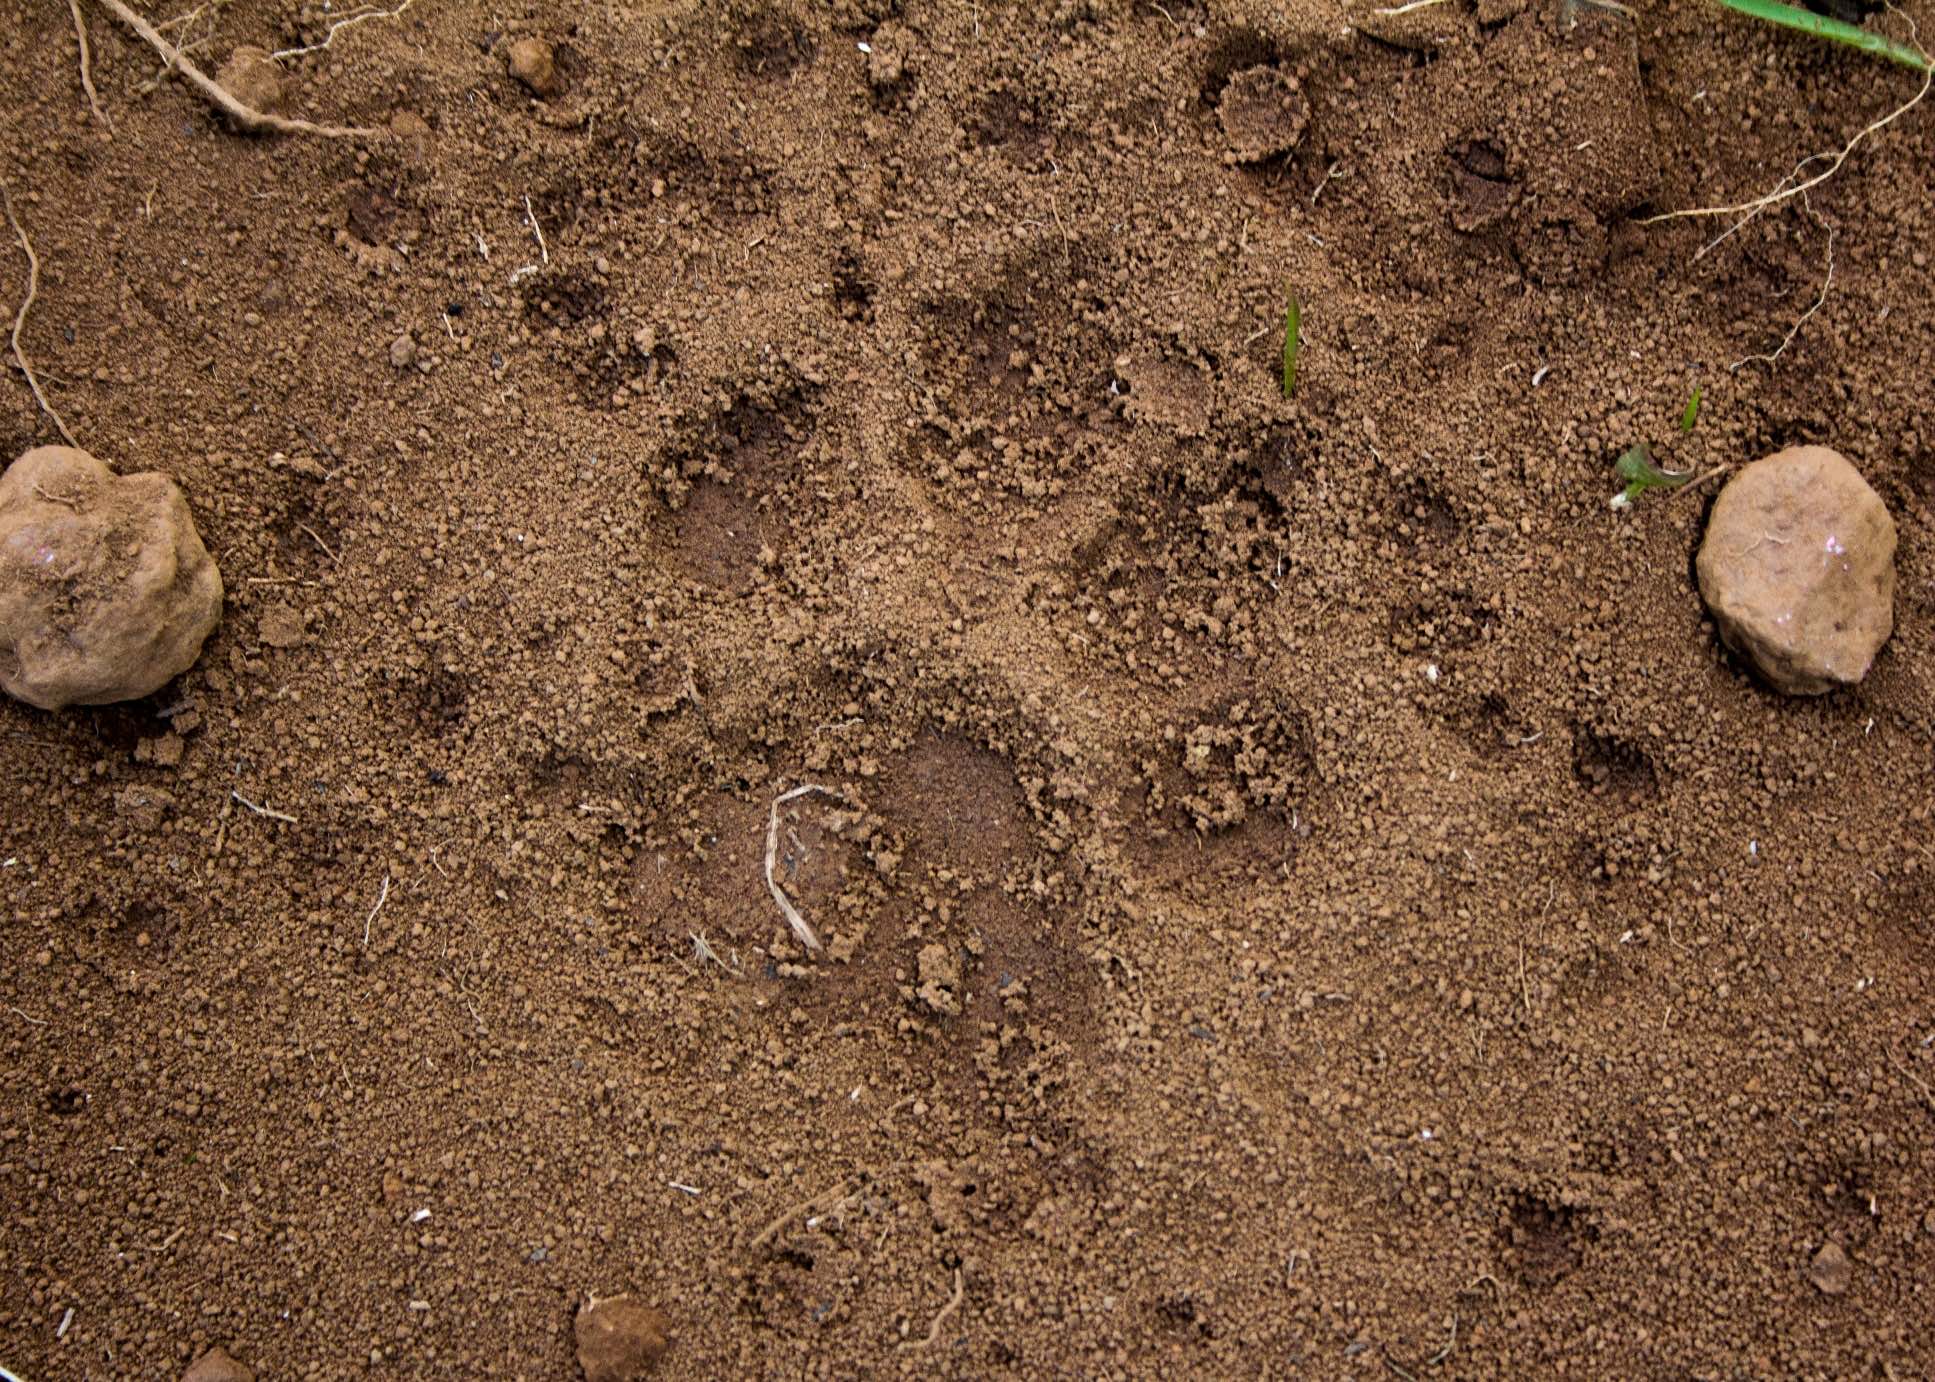 A tiger's pugmark. Source: Author provided